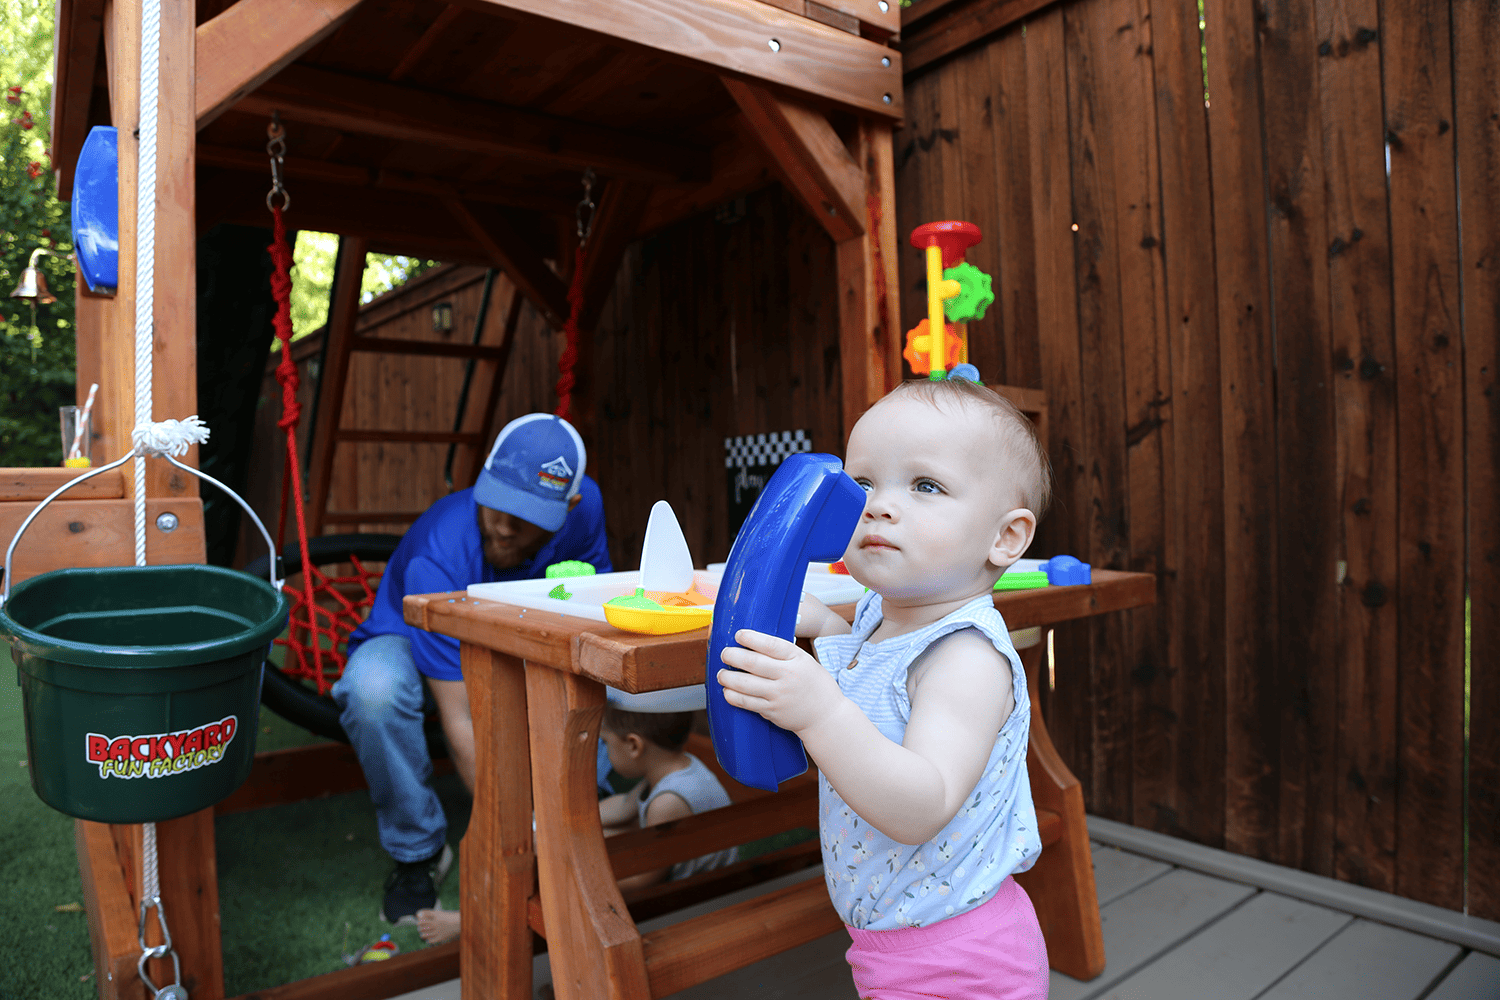 schedule time, lake worth, texas, little baby girl playing with blue toy telephone in backyard playset